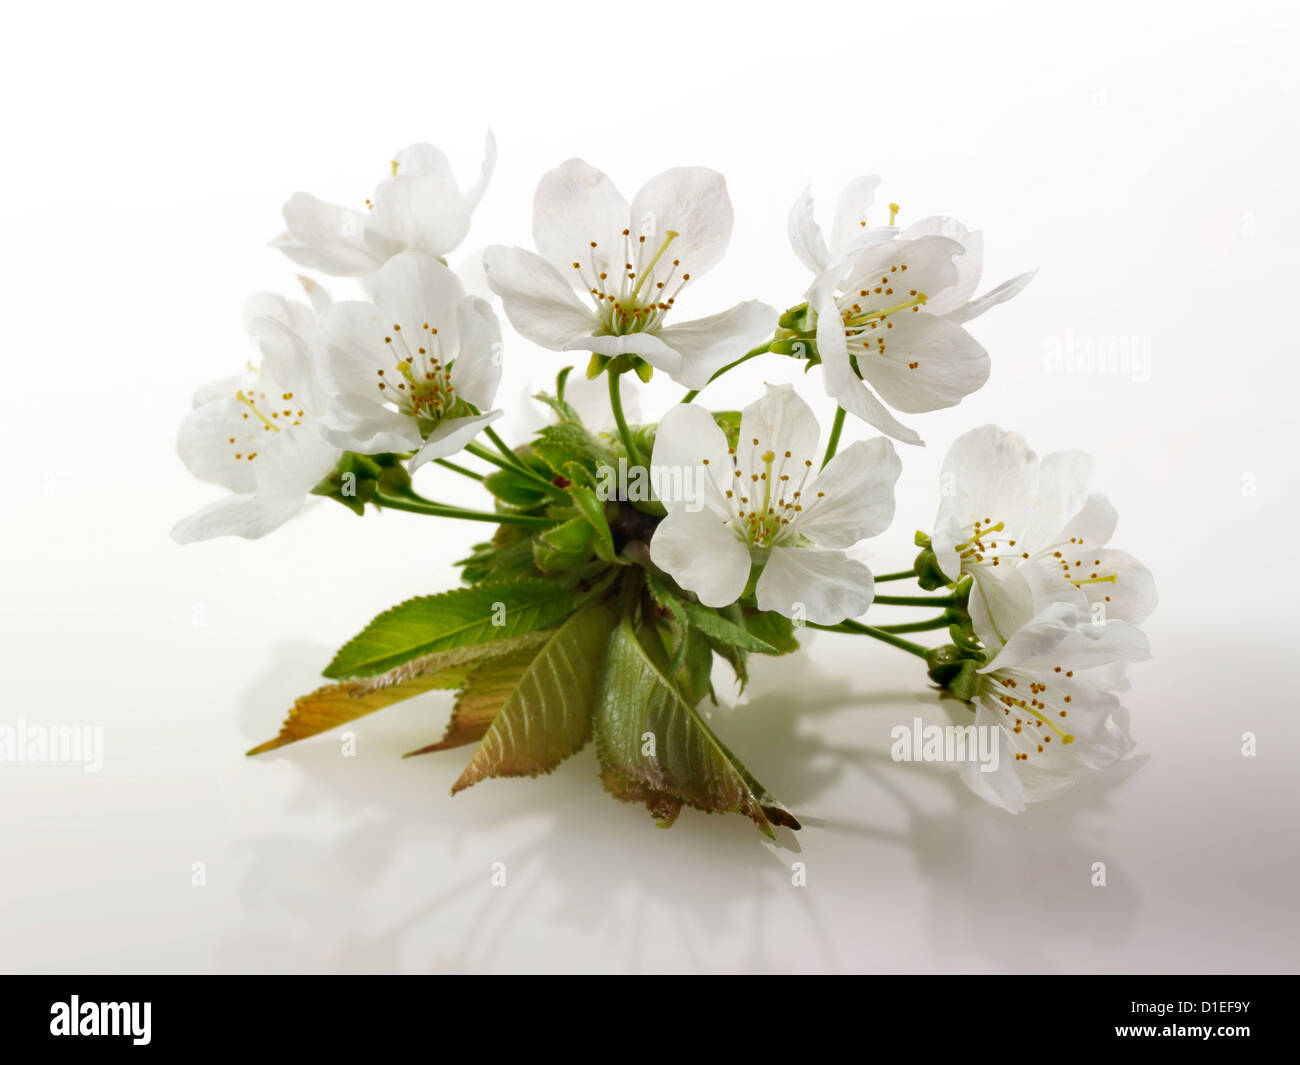 Stock Photos of close up of cherry blossom on a white background. Funky stock photos library Stock Photo